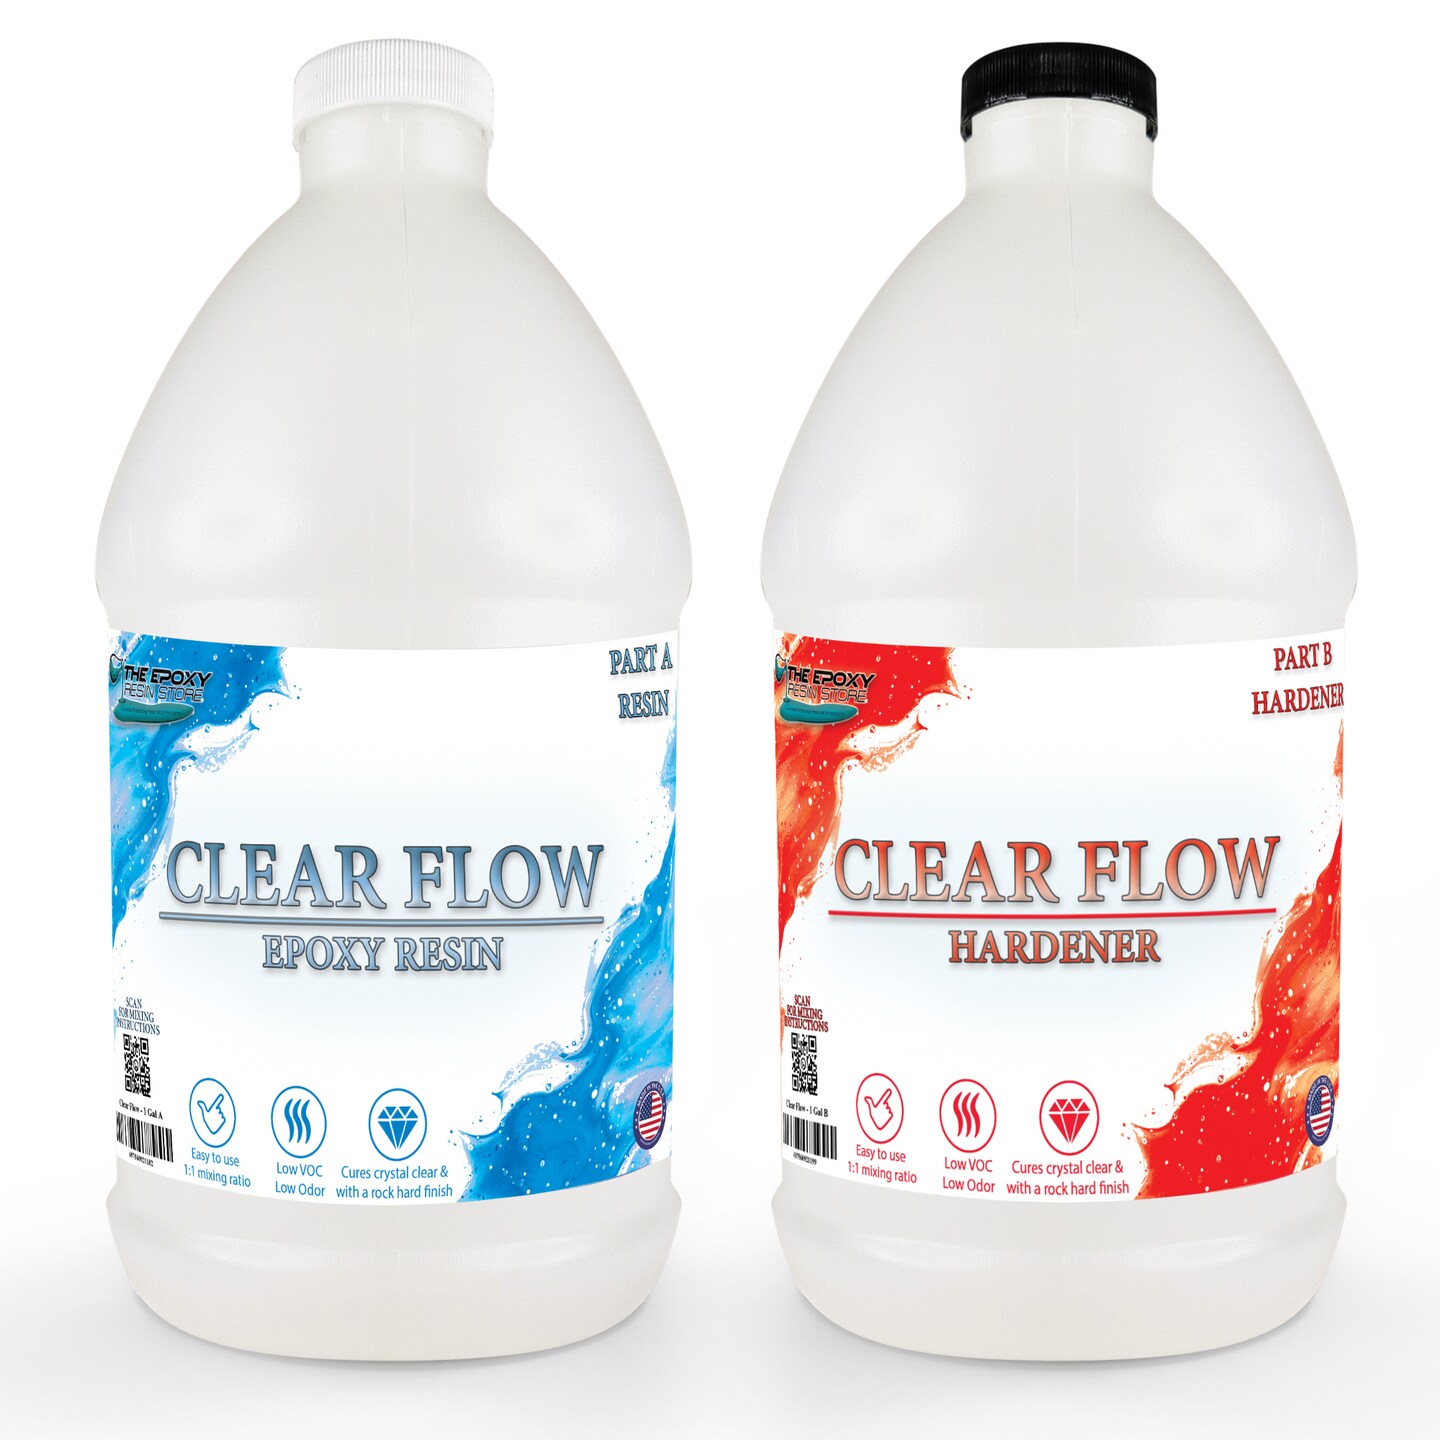 Clear flow epoxy resin, 2 part, resin, low odor, easy to use, (1-1) mixing